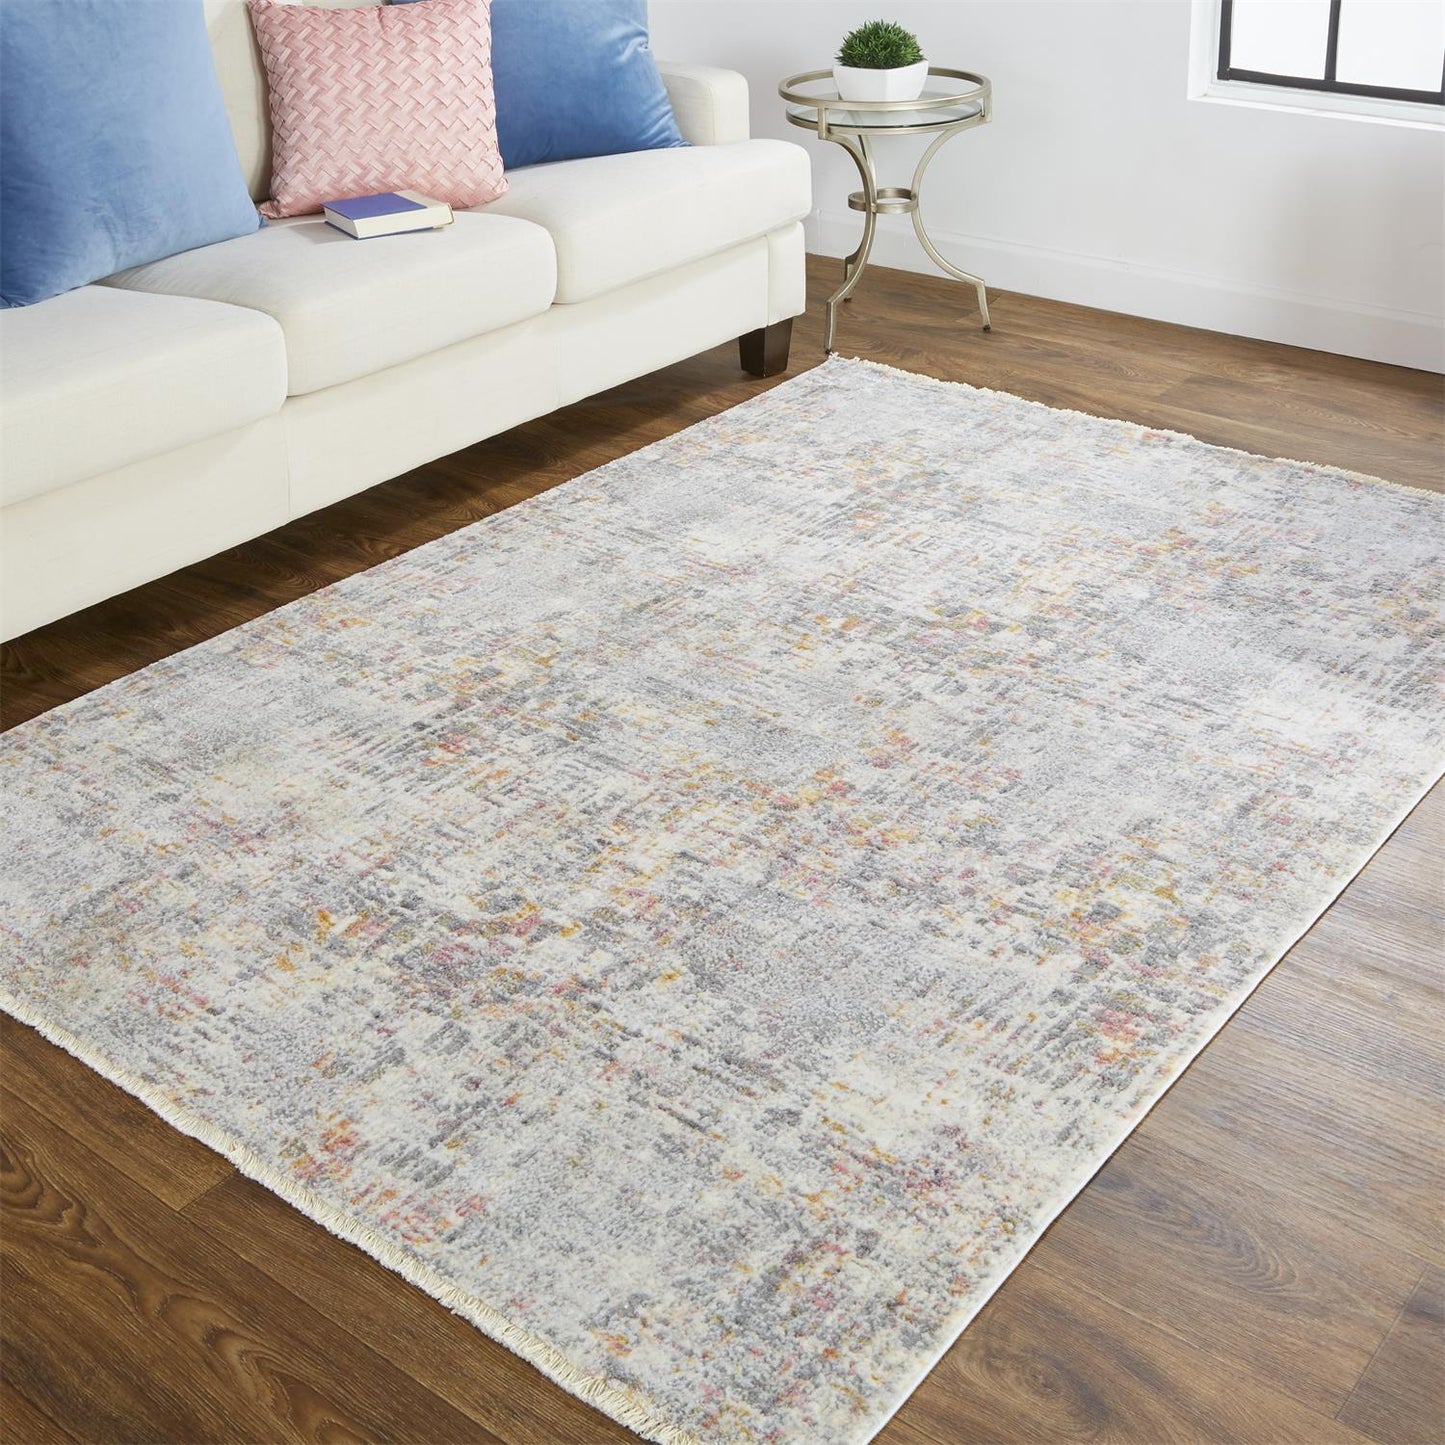 Kyra 3856F Machine Made Synthetic Blend Indoor Area Rug by Feizy Rugs